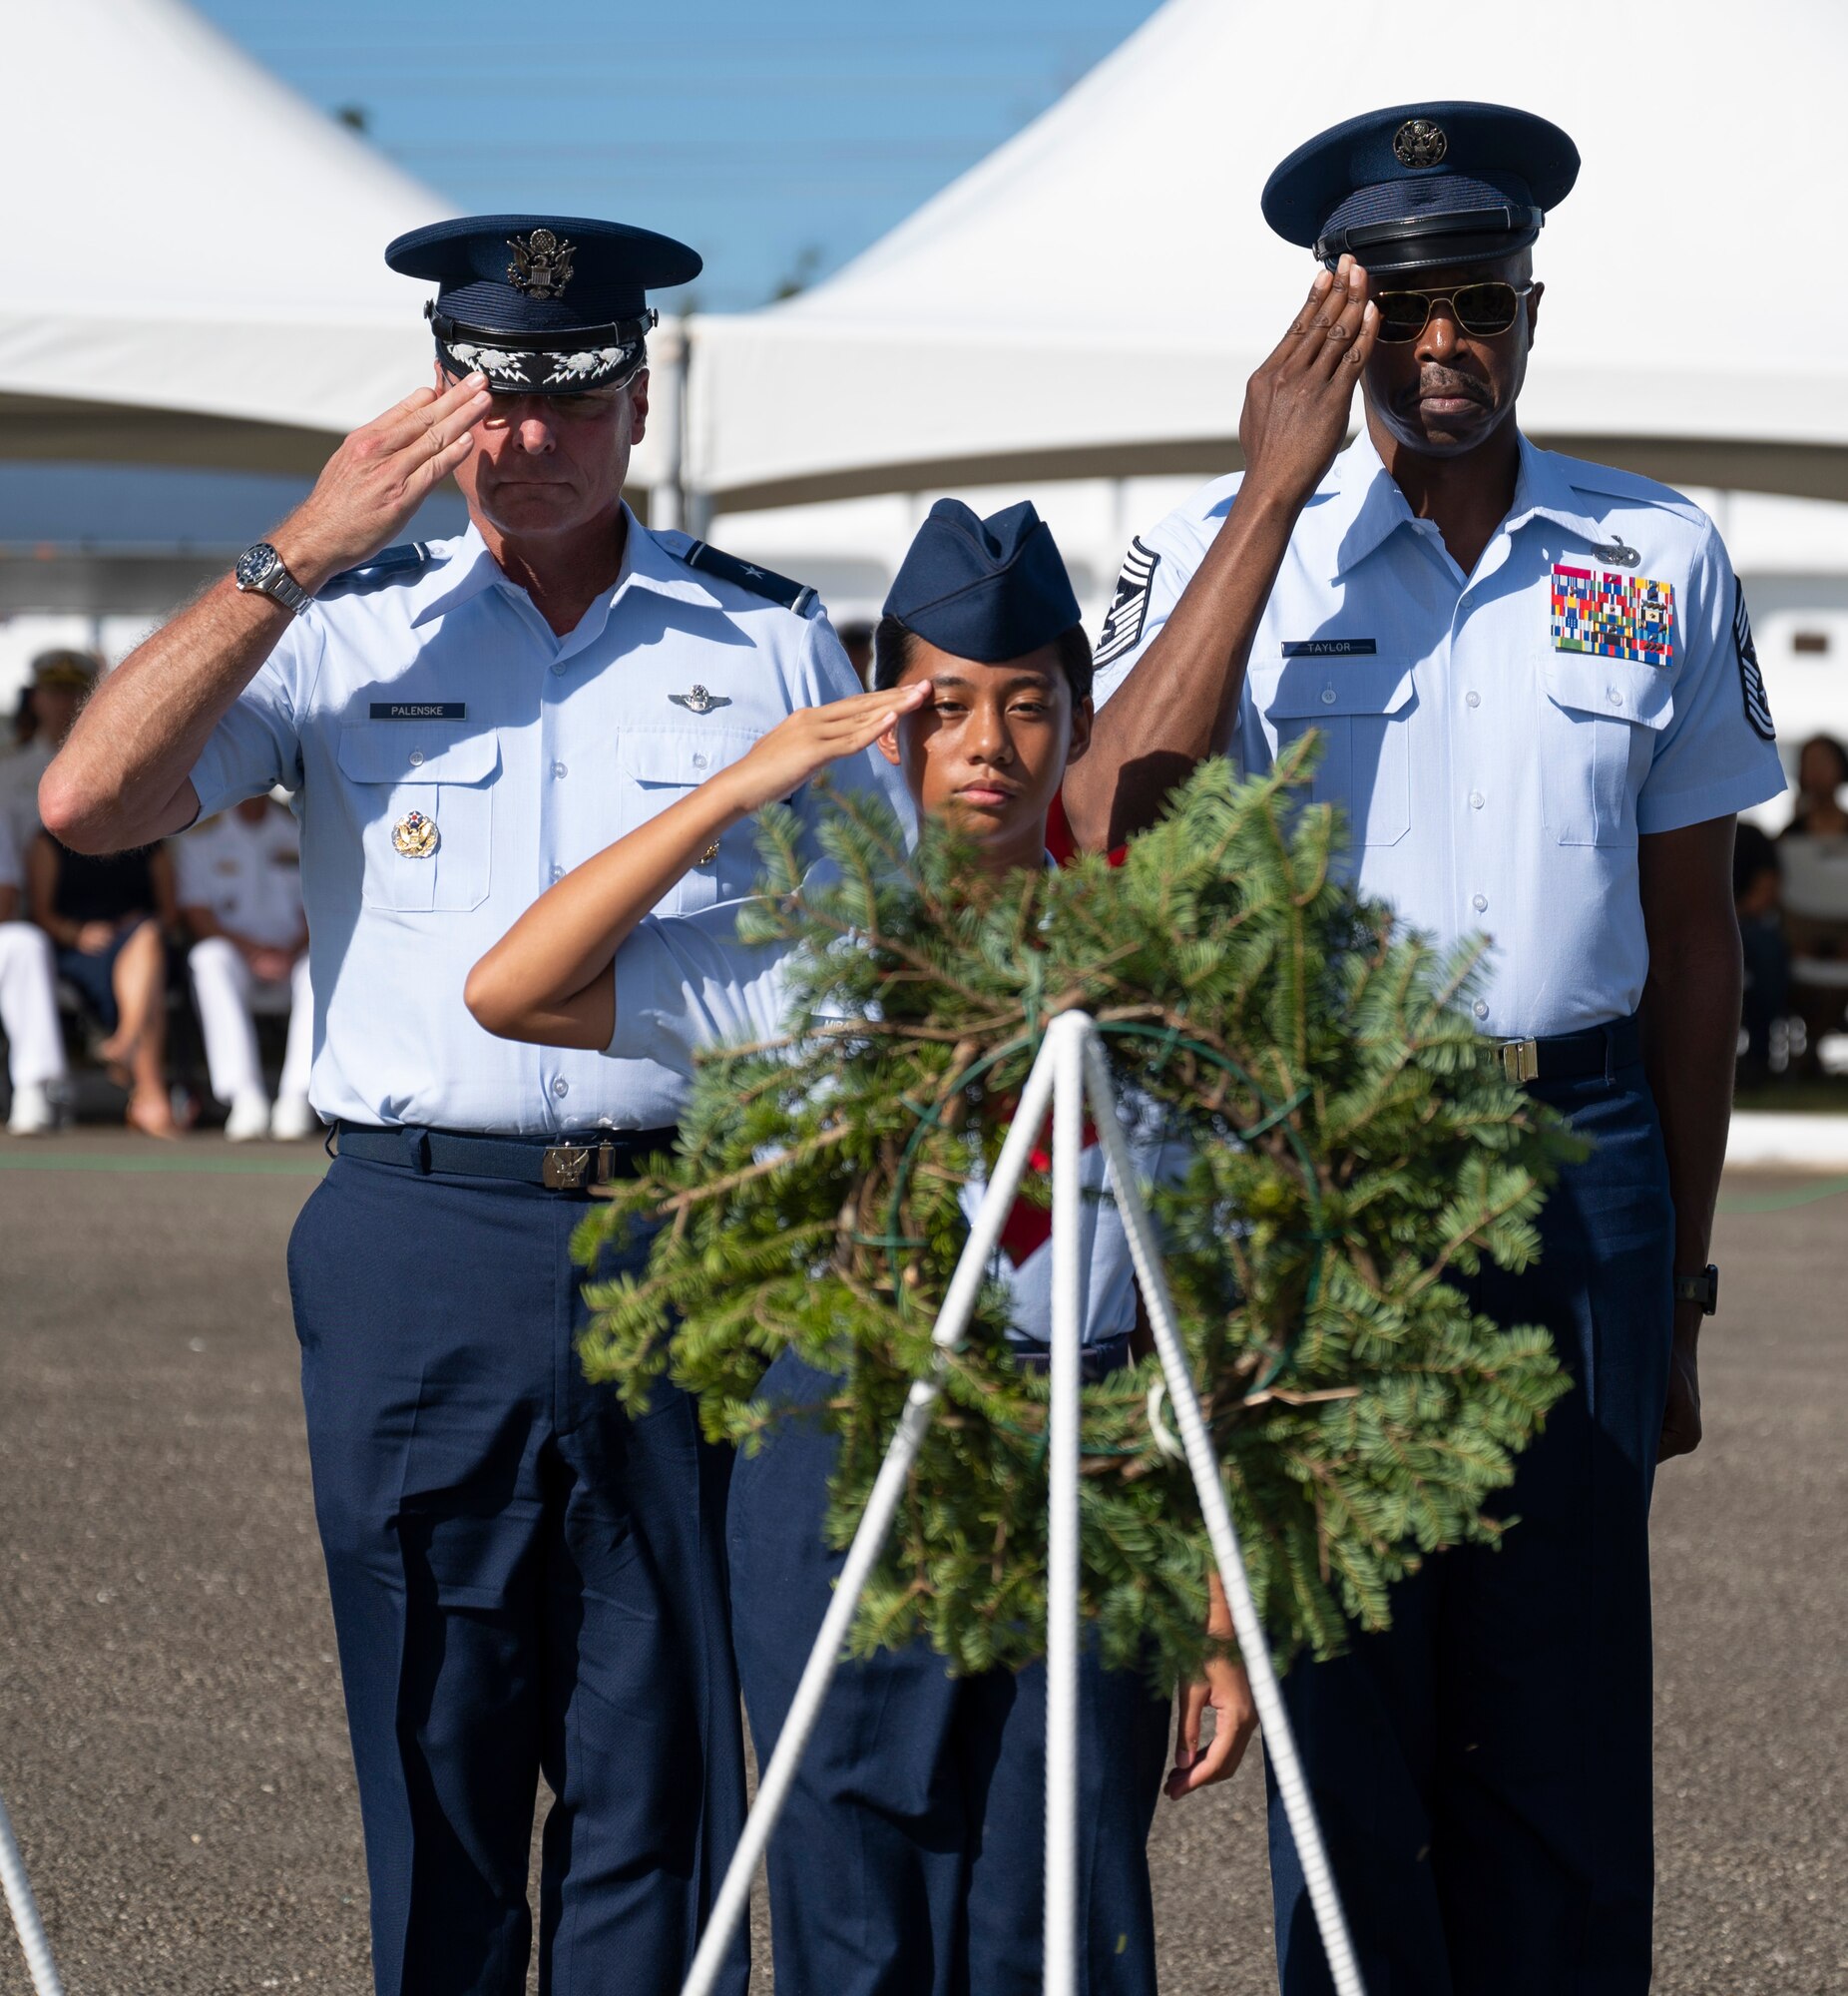 U.S. Air Force Brig. Gen. Thomas Palenske, 36th Wing commander, Chief Master Sgt. Nicholas Taylor, 36th Wing command chief, and a member of the junior reserve officer training corps salute a wreath during the Wreaths Across America ceremony at the Guam Veterans Cemetery, Guam, Dec. 16, 2023. The Wreaths Across America program allows families to honor and remember the sacrifices of our military Veterans by placing wreaths on their graves during the holiday season. (U.S. Air Force photo by Airman 1st Class Spencer Perkins)